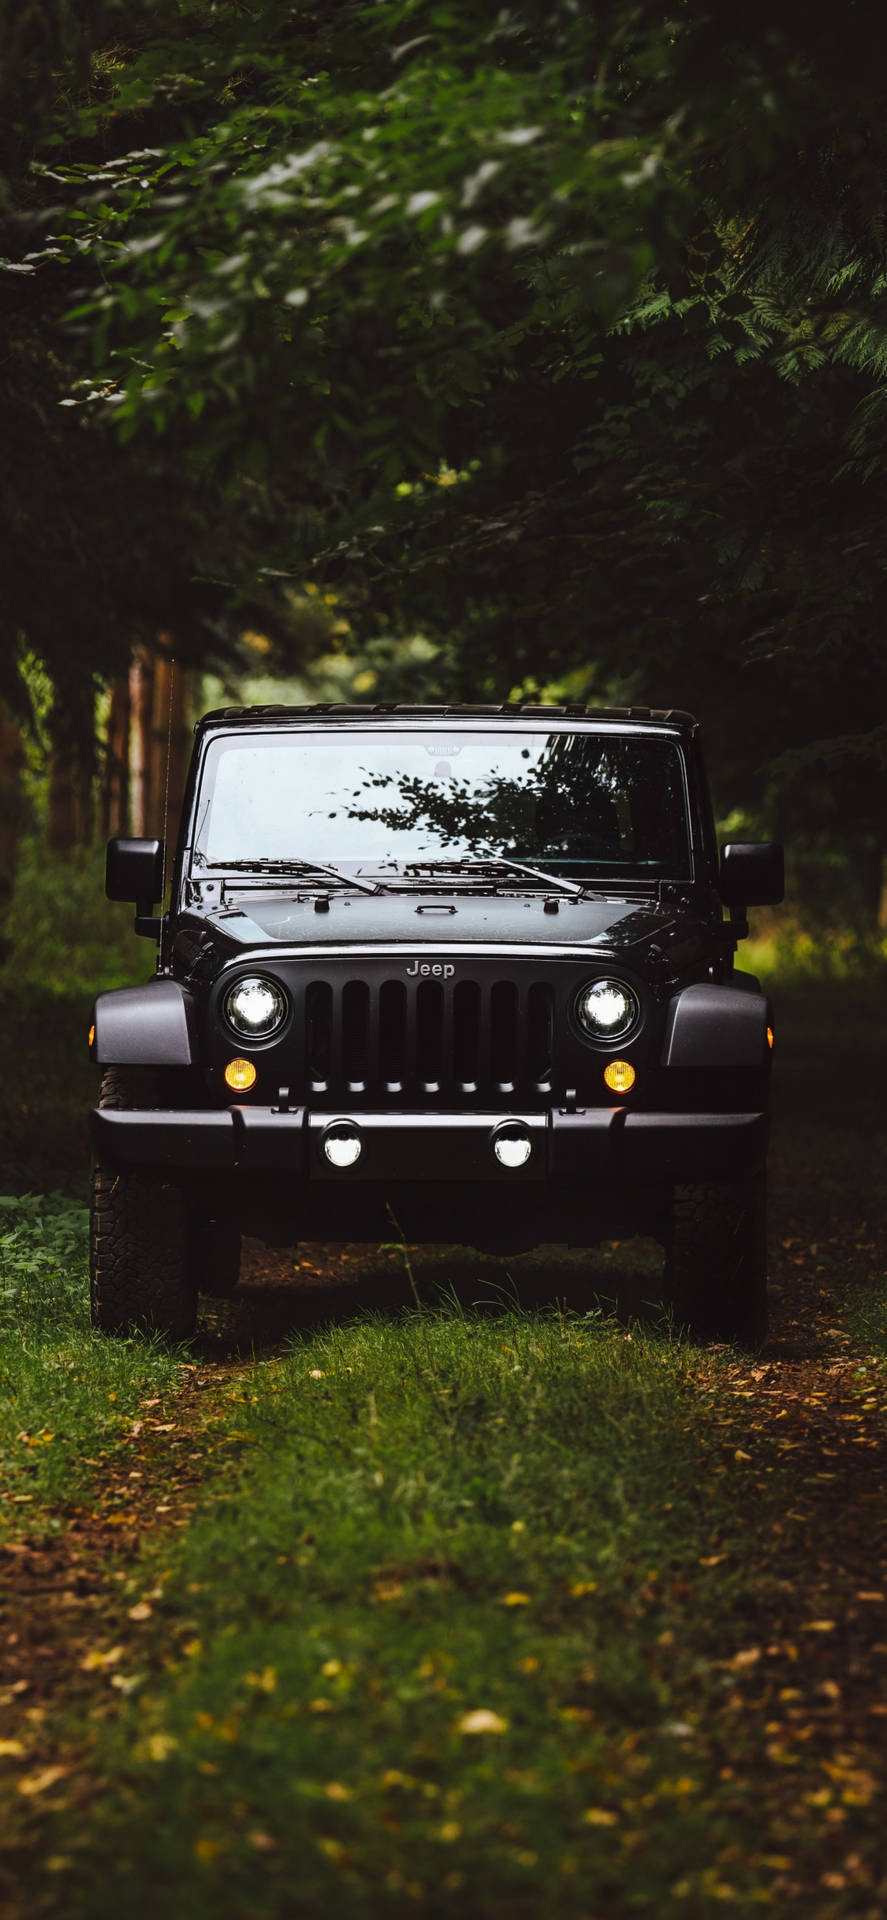 A Stunning Black Jeep Wrangler Venturing Through A Secluded Forest. Background